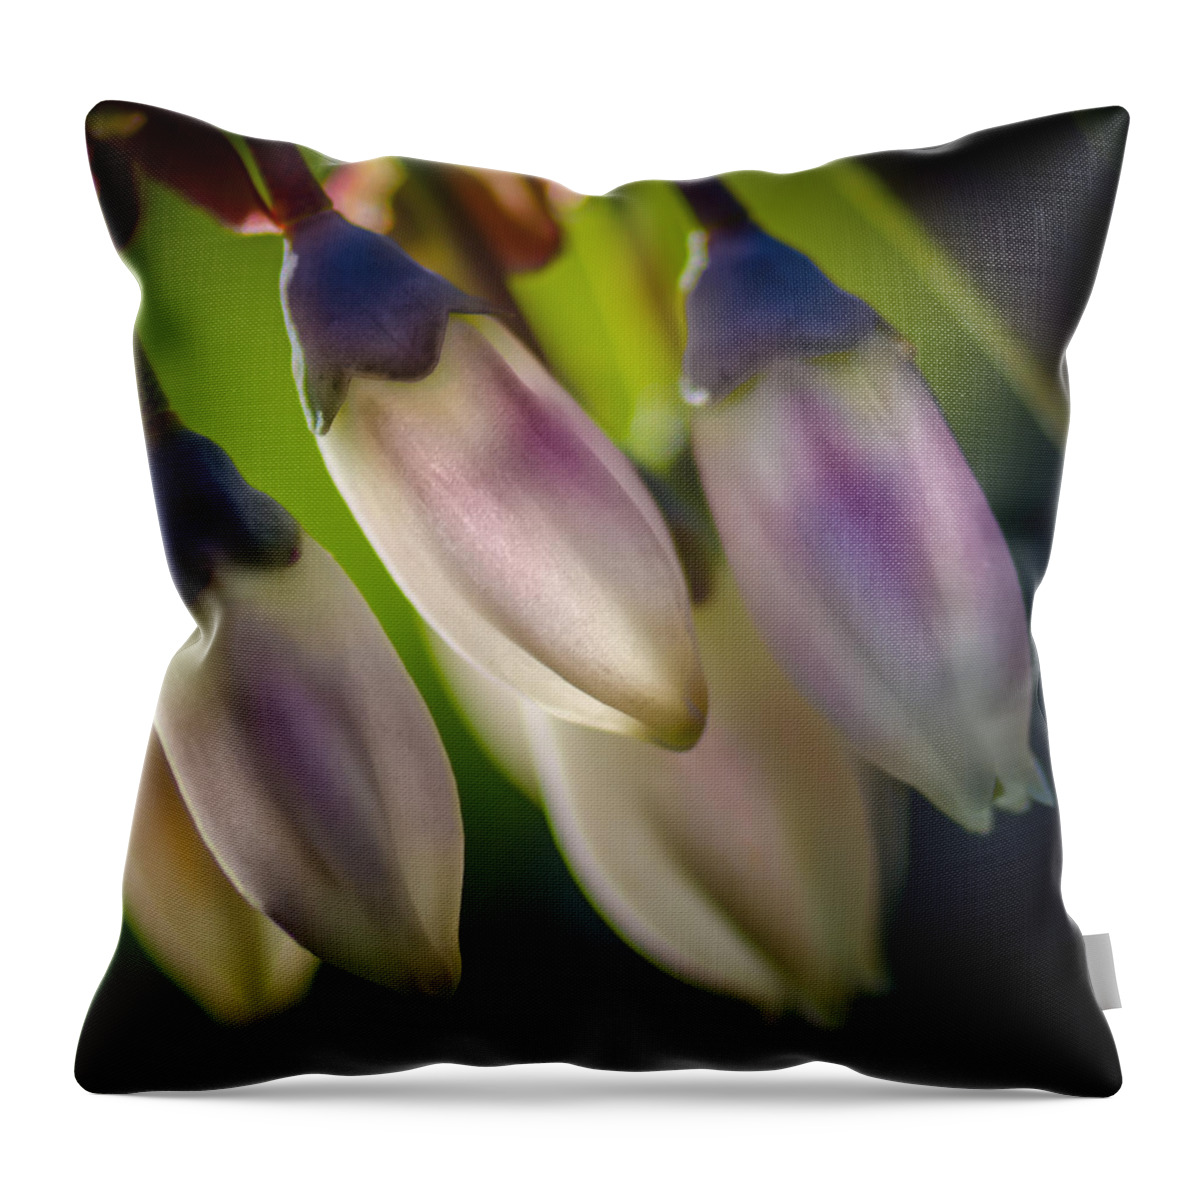 Blueberry Throw Pillow featuring the photograph Blueberry Blossom by James Barber